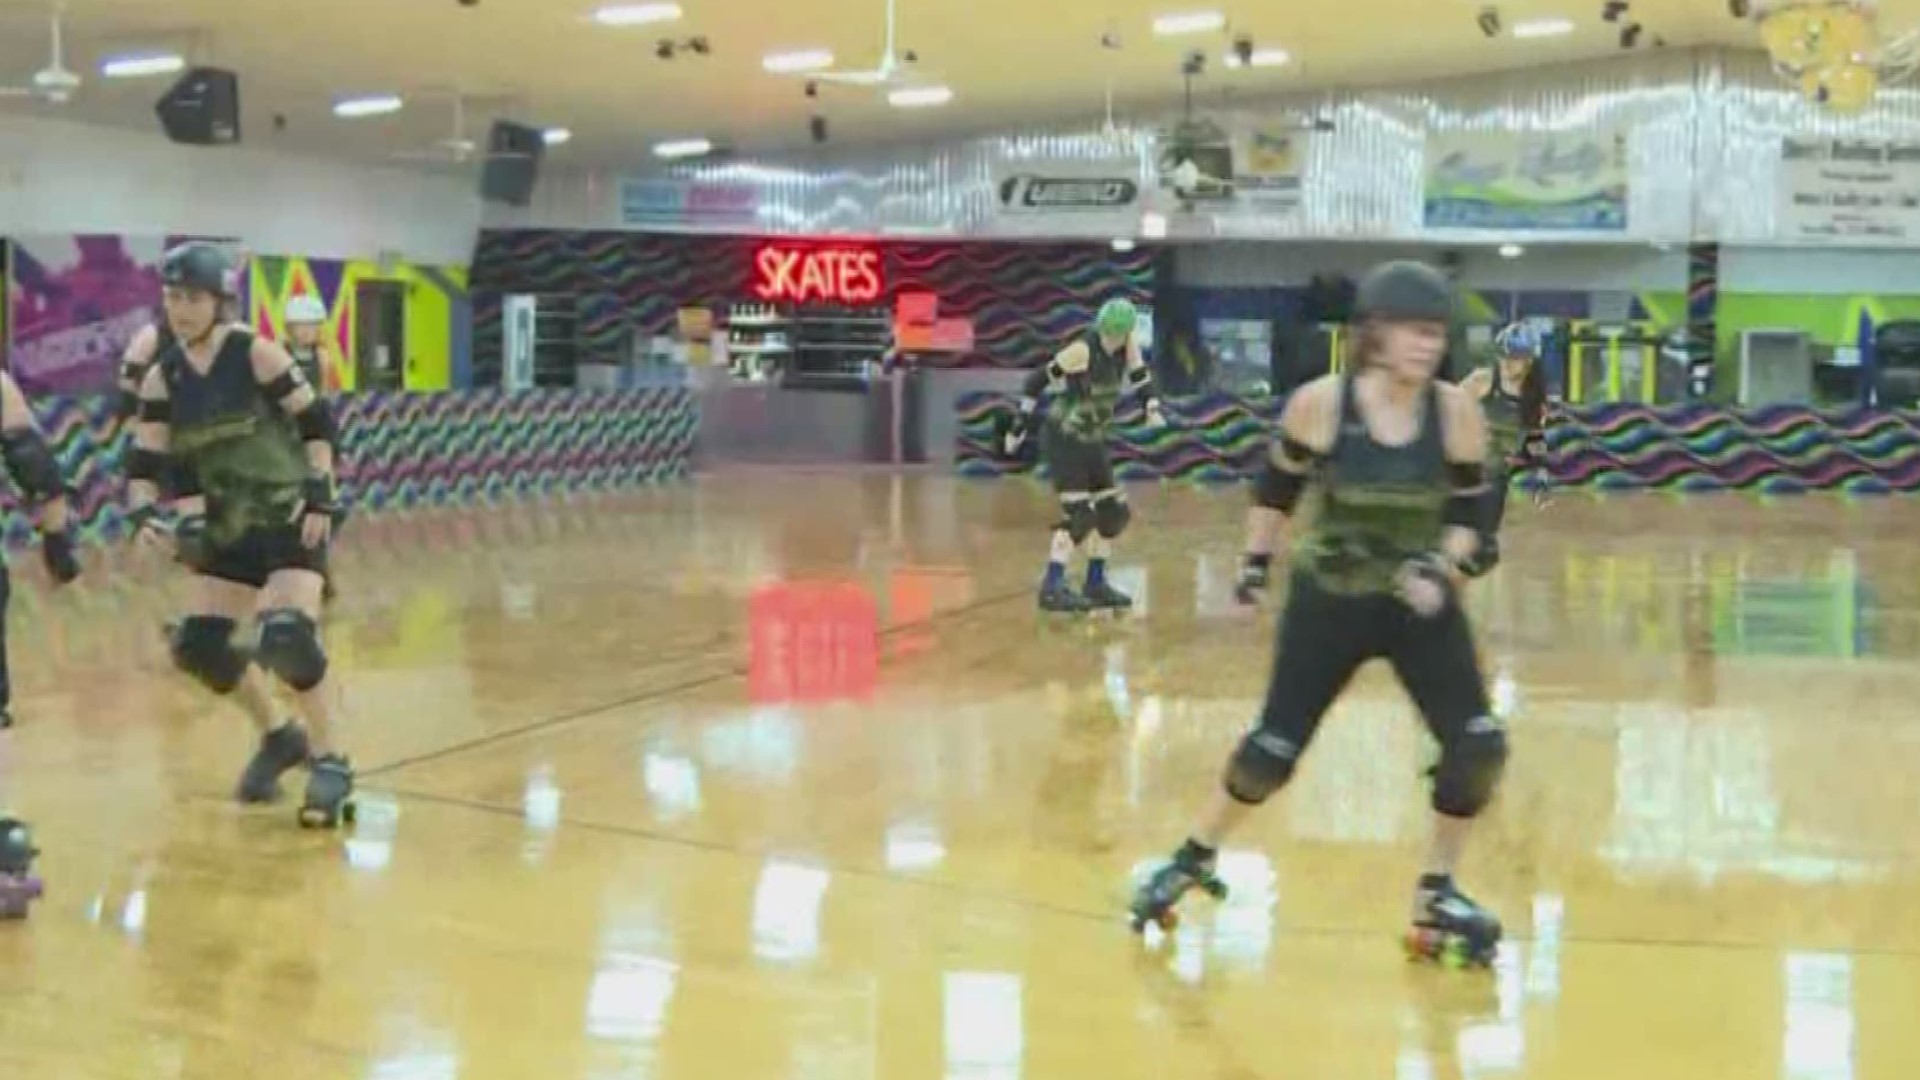 A local roller derby team is looking to take home a win tonight and raise money for a good cause in the process.

The Valkyries are facing off against Fort Myers for a derby match to remember, with a portion of the match's proceeds going to the Pasco Sheriff’s K9 Association. The group raises funds and awareness for both active and retired K9s.